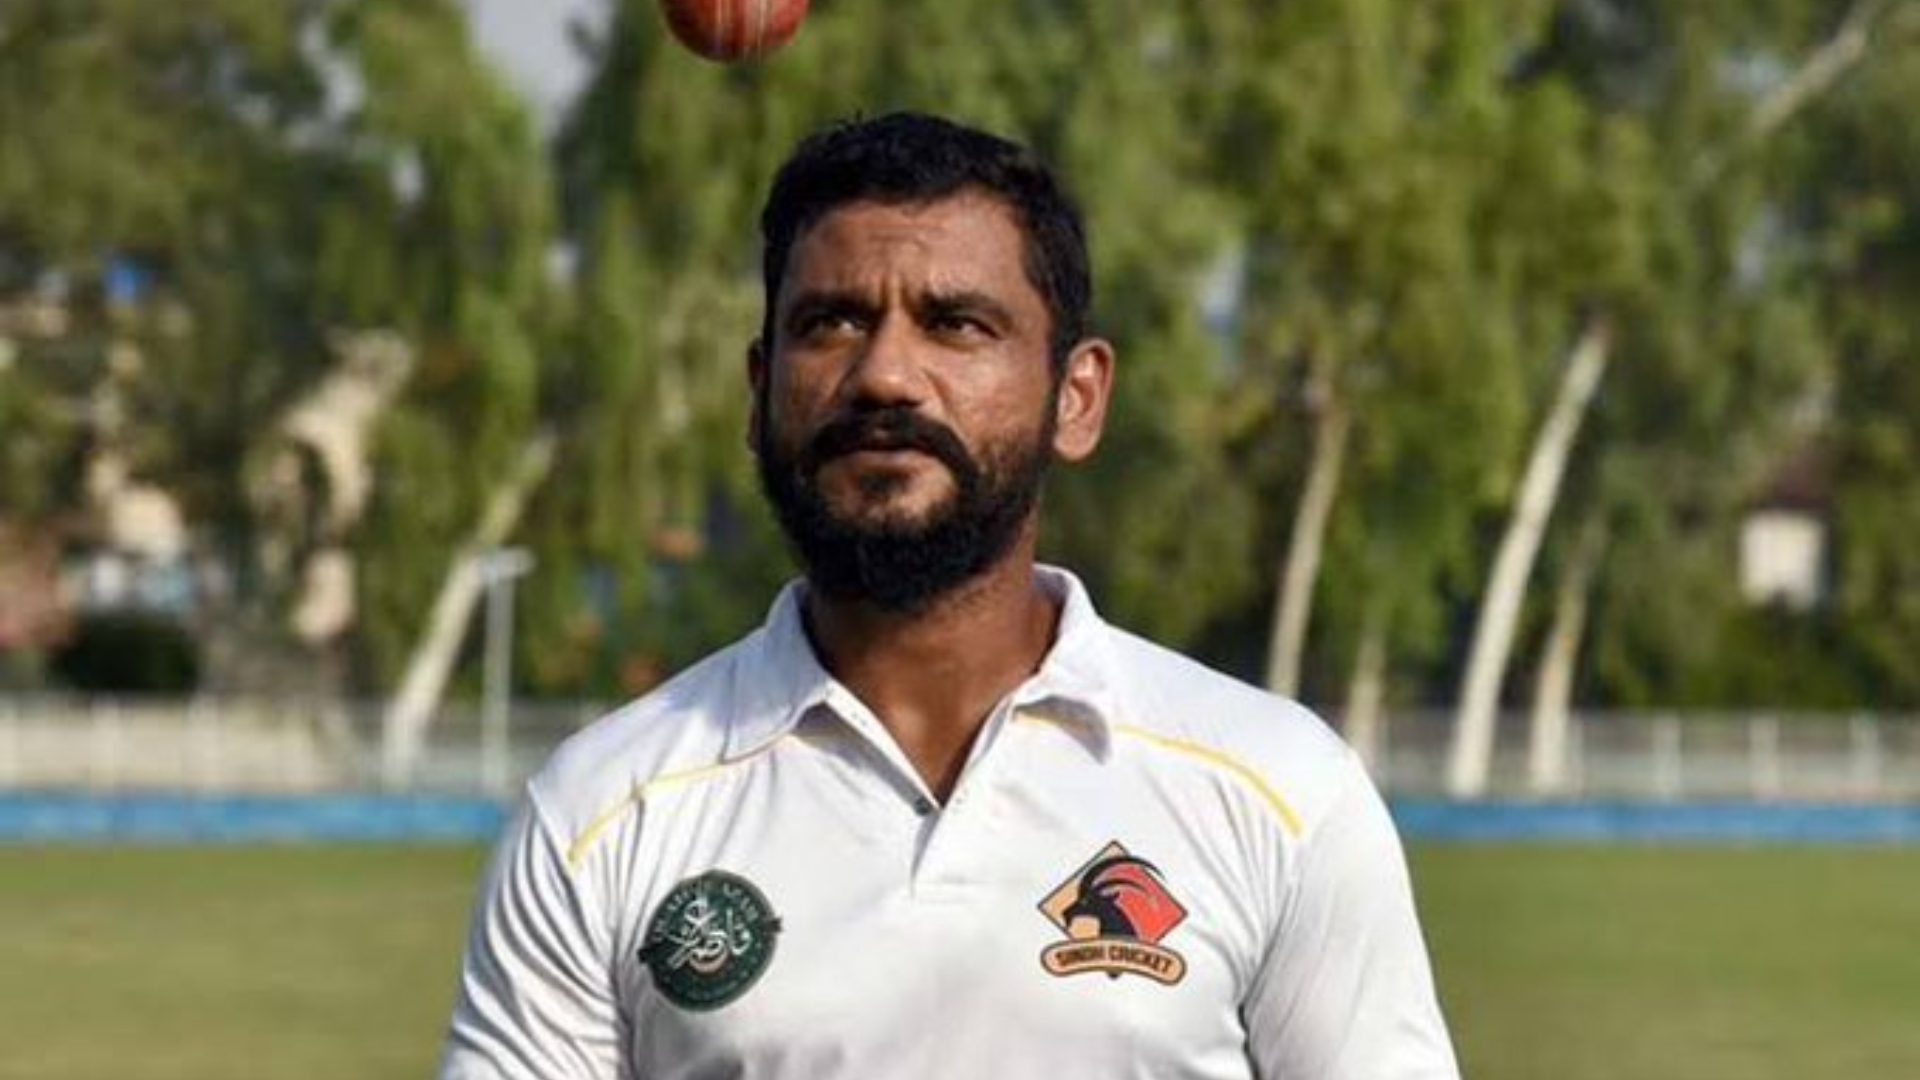 Tabish Khan took 598 wickets in First Class cricket before making his debut for Pakistan against Zimbabwe.